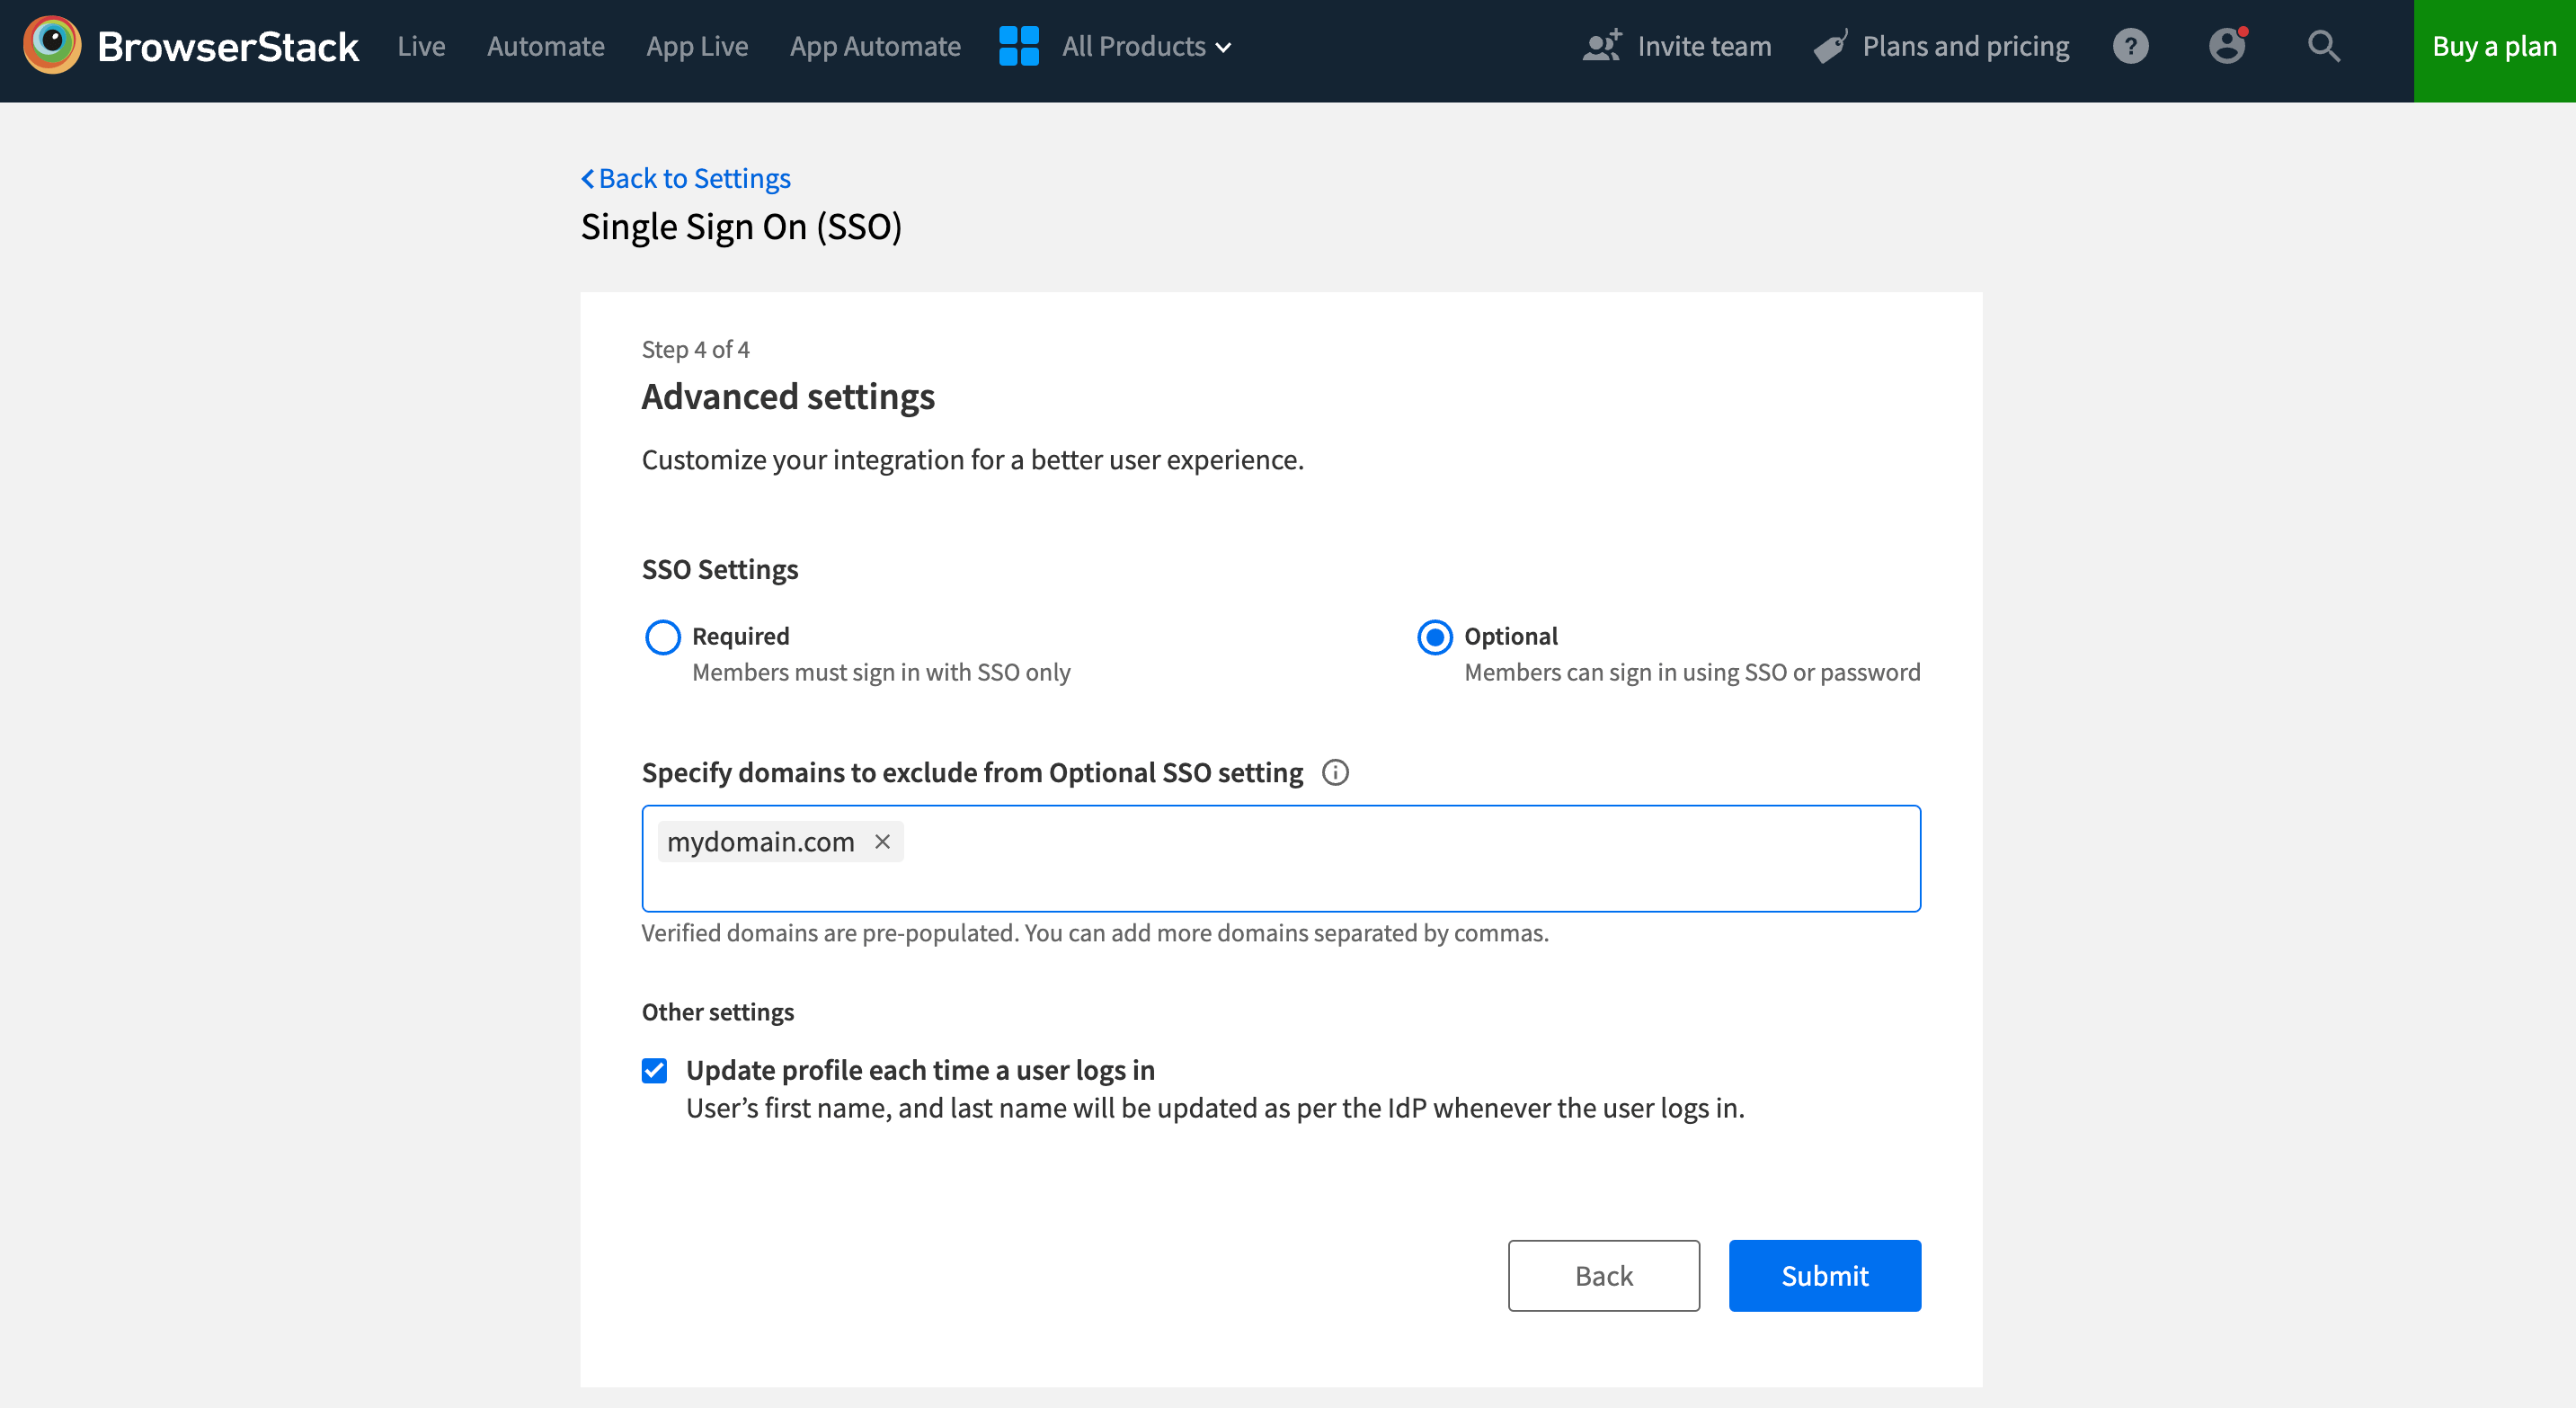 Update profile option in SSO Settings